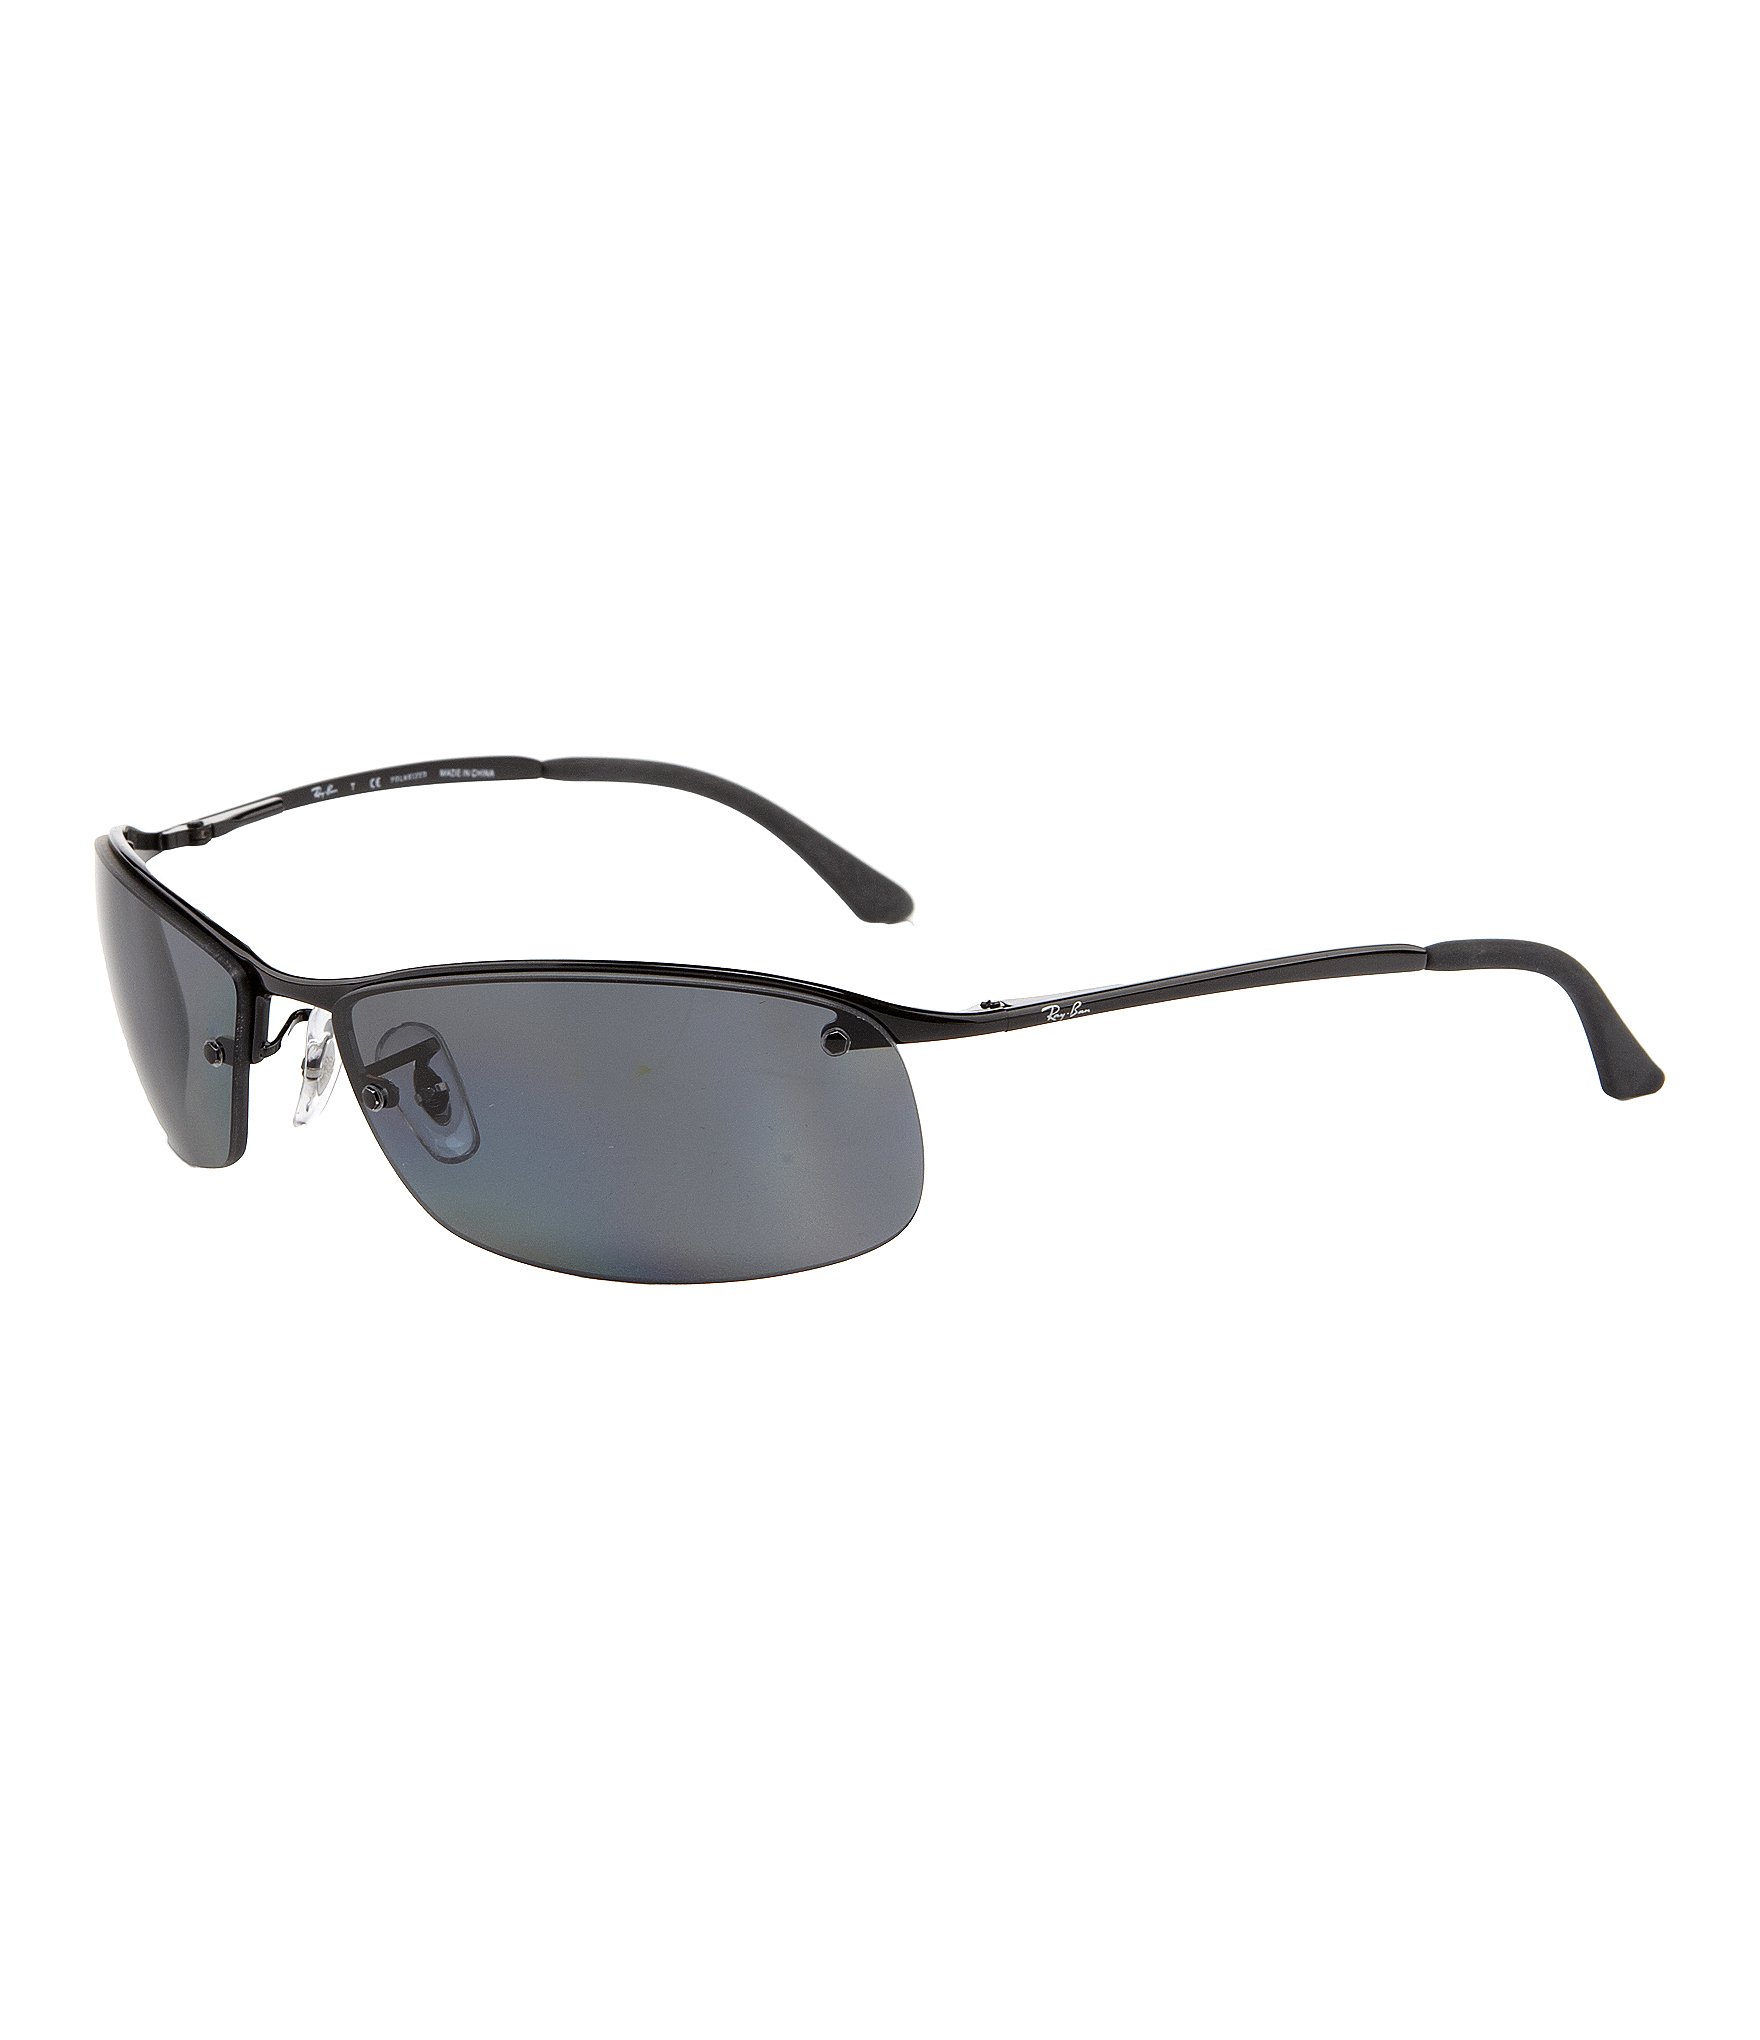 sunglasses with uva and uvb protection